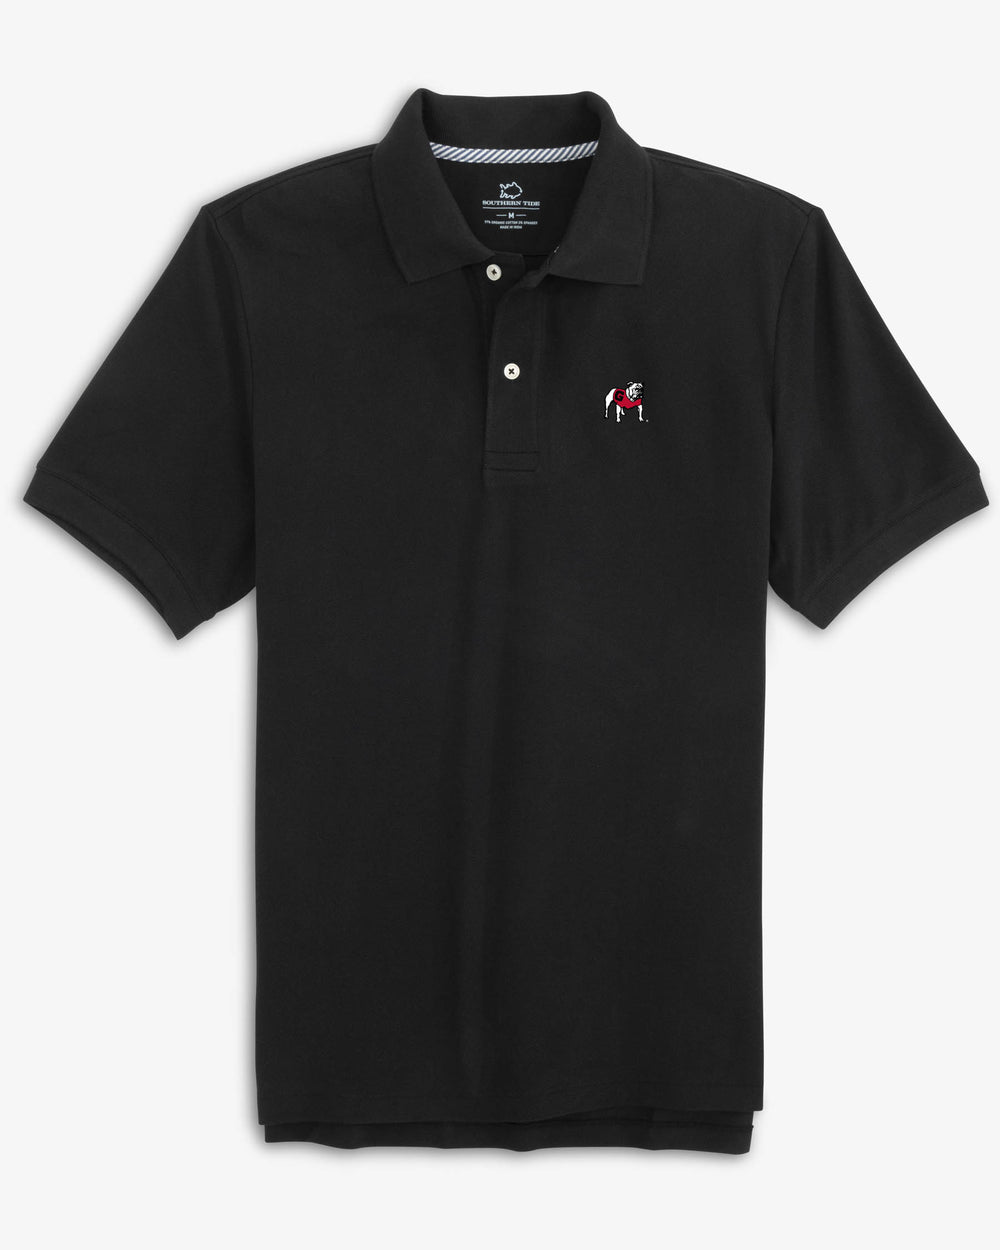 The front view of the Georgia Bulldogs New Short Sleeve Skipjack Polo by Southern Tide - Black